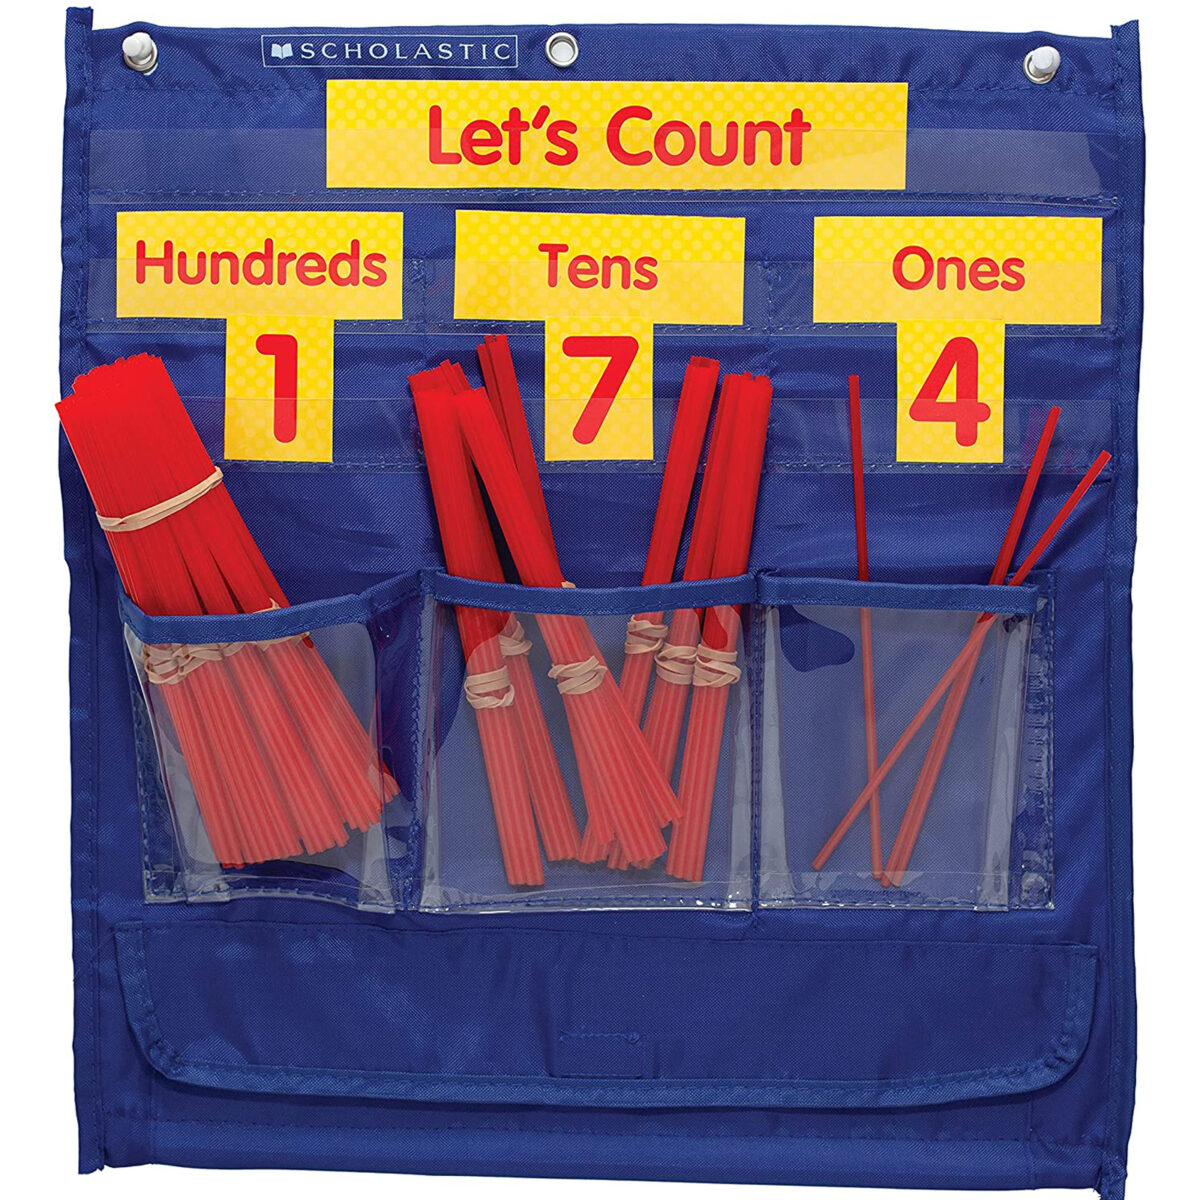 Counting Caddie and Place Value Pocket Chart (Scholastic) is a game to learn place values with 3 digits.